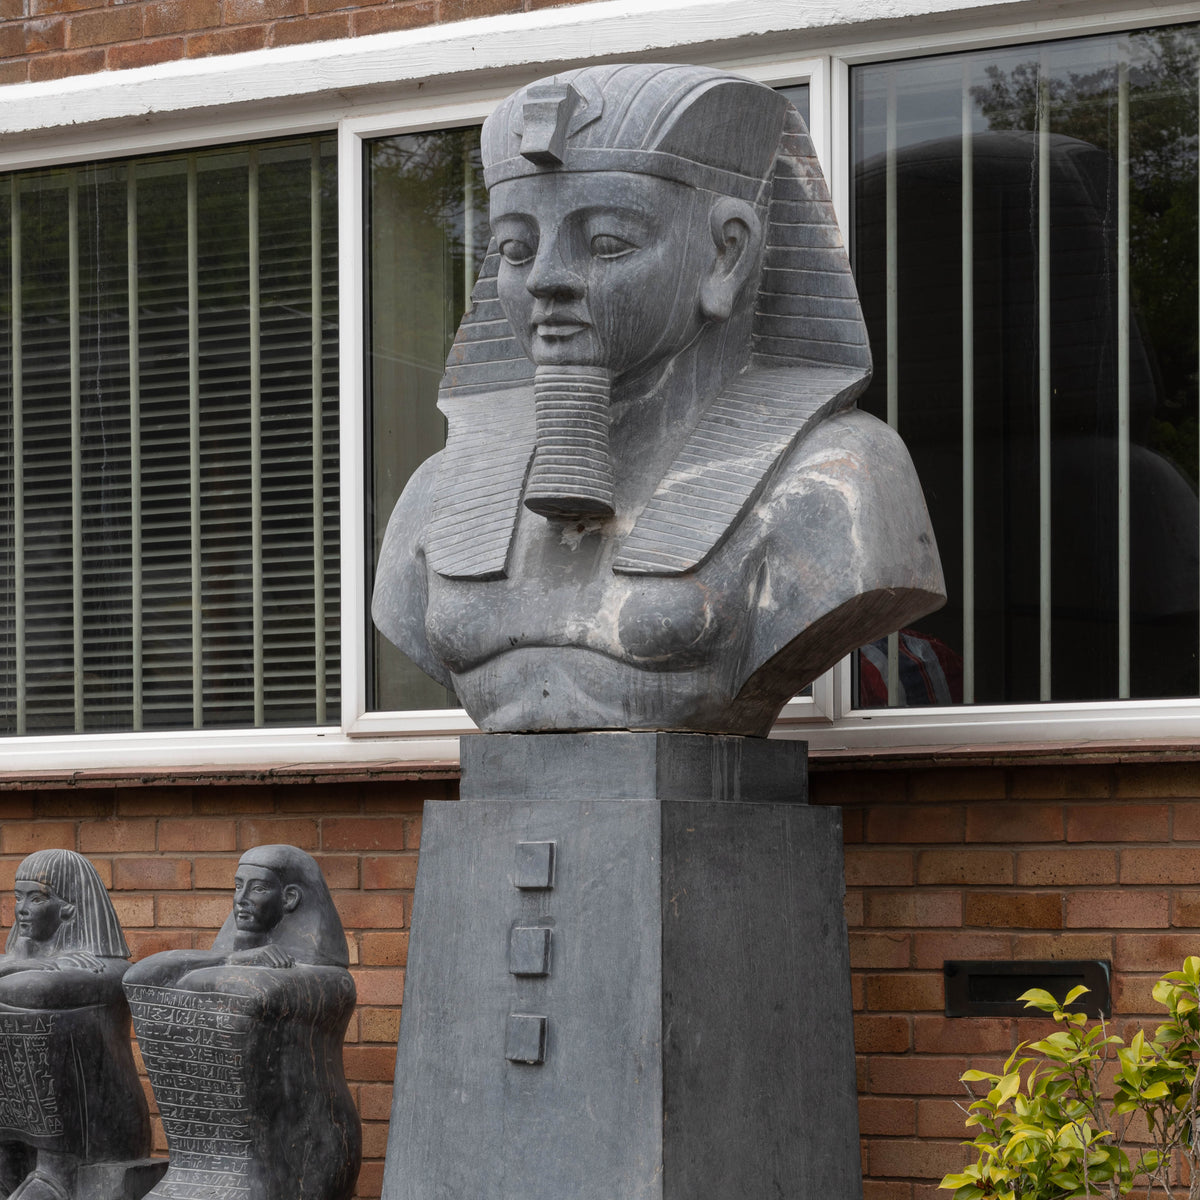 Monumental Egyptian Pharaoh Marble Statue on Plinth | The Architectural Forum